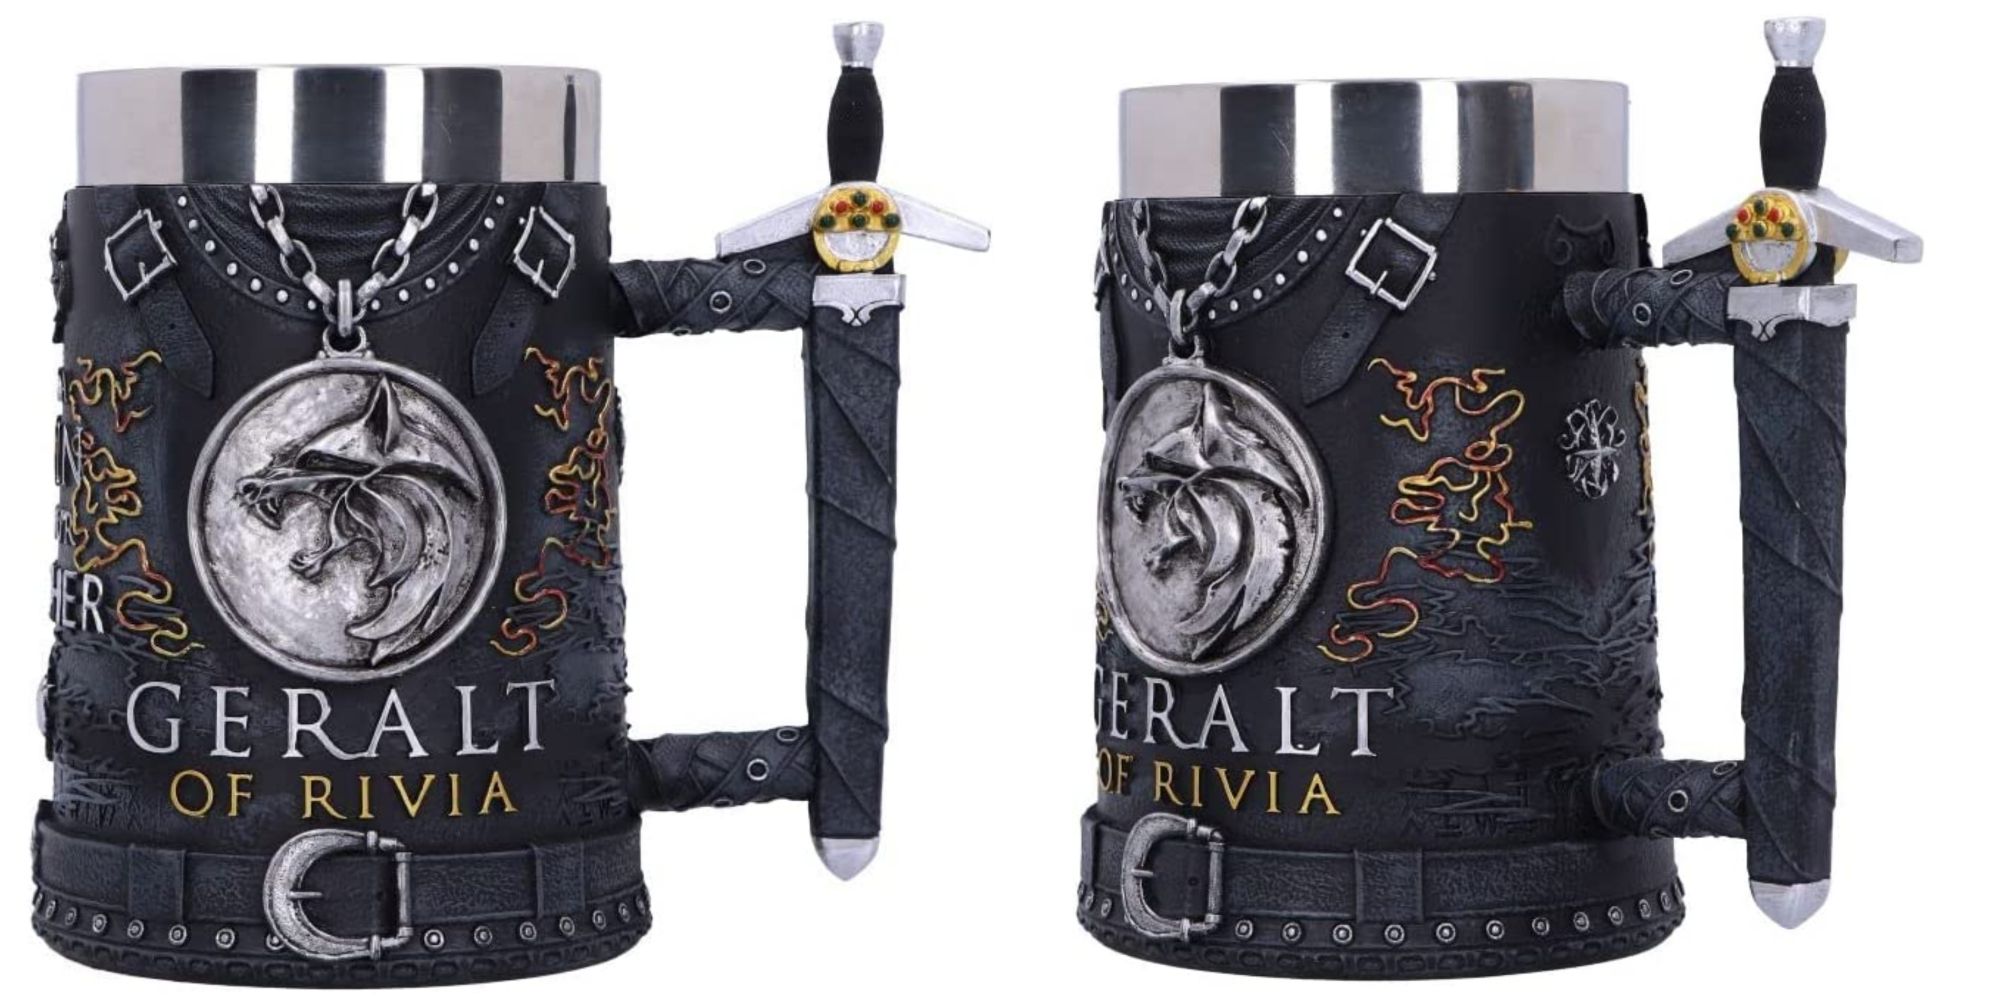 The Witcher Geralt of Rivia Tankard front and side